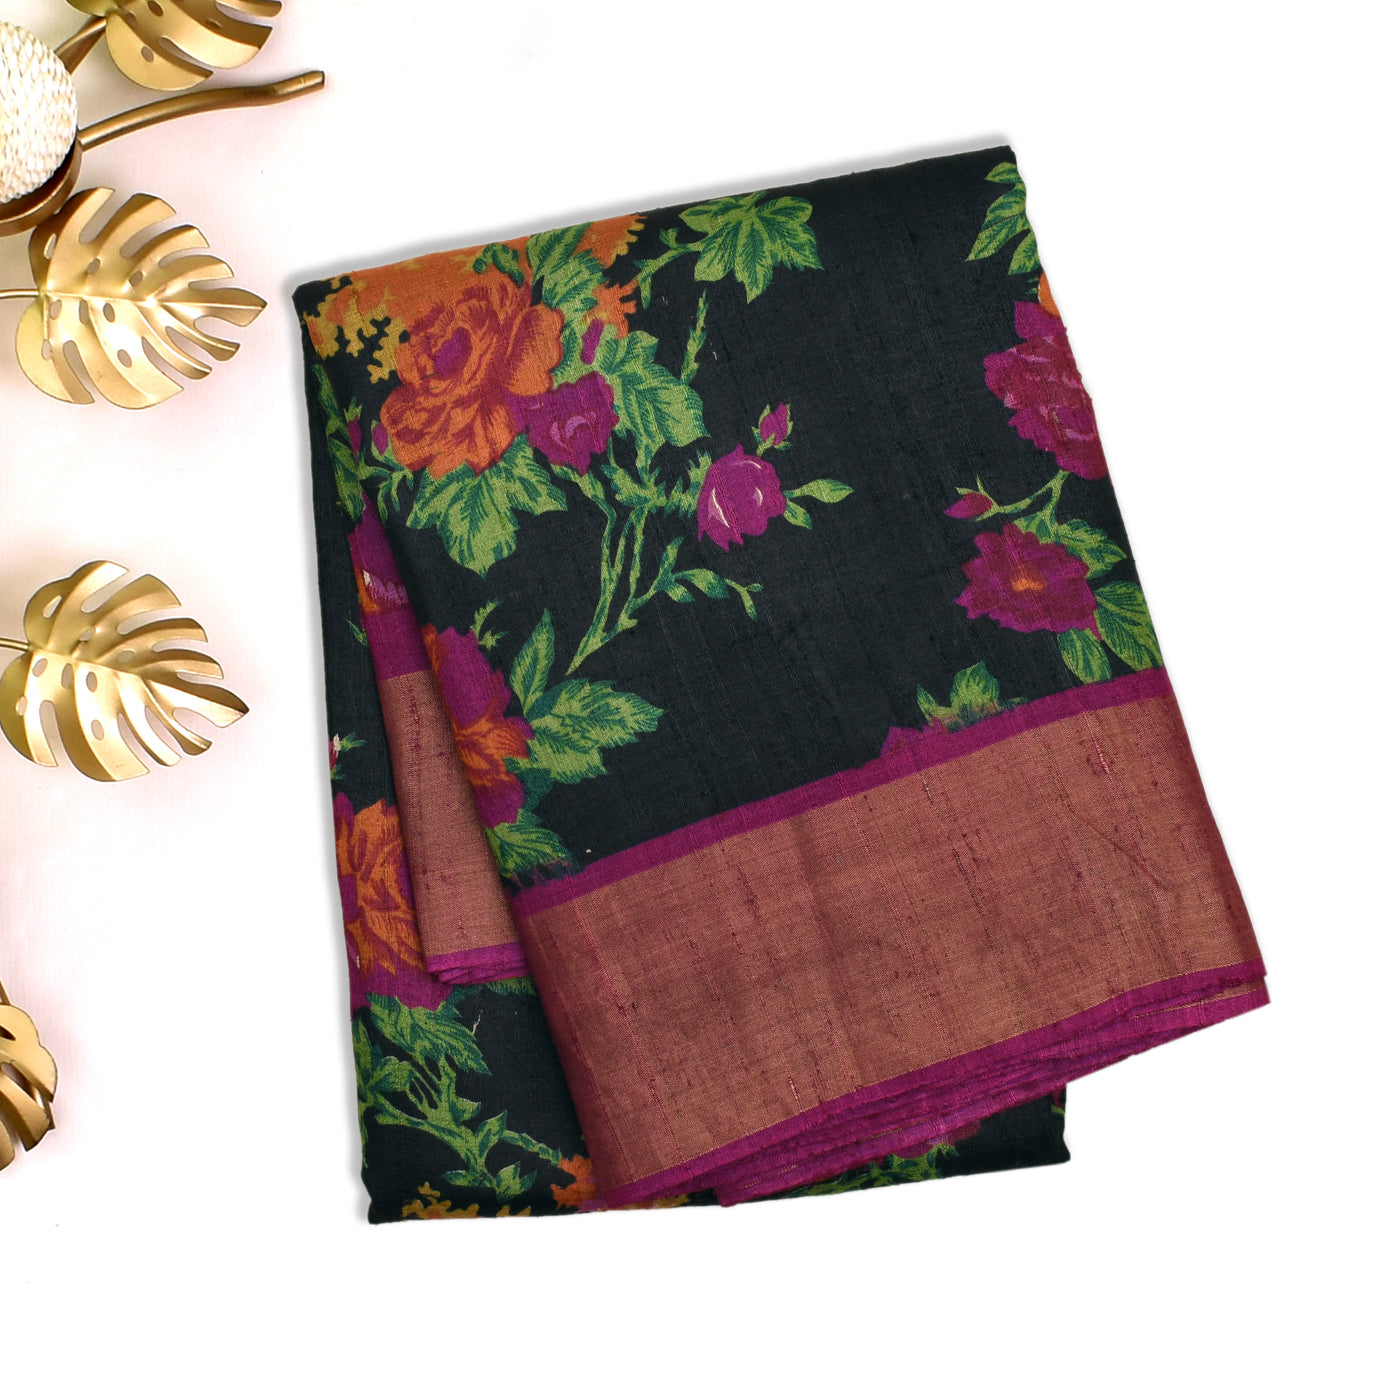 https://anyaonline.in/products/black-tussar-silk-saree-with-flower-printed-design-1